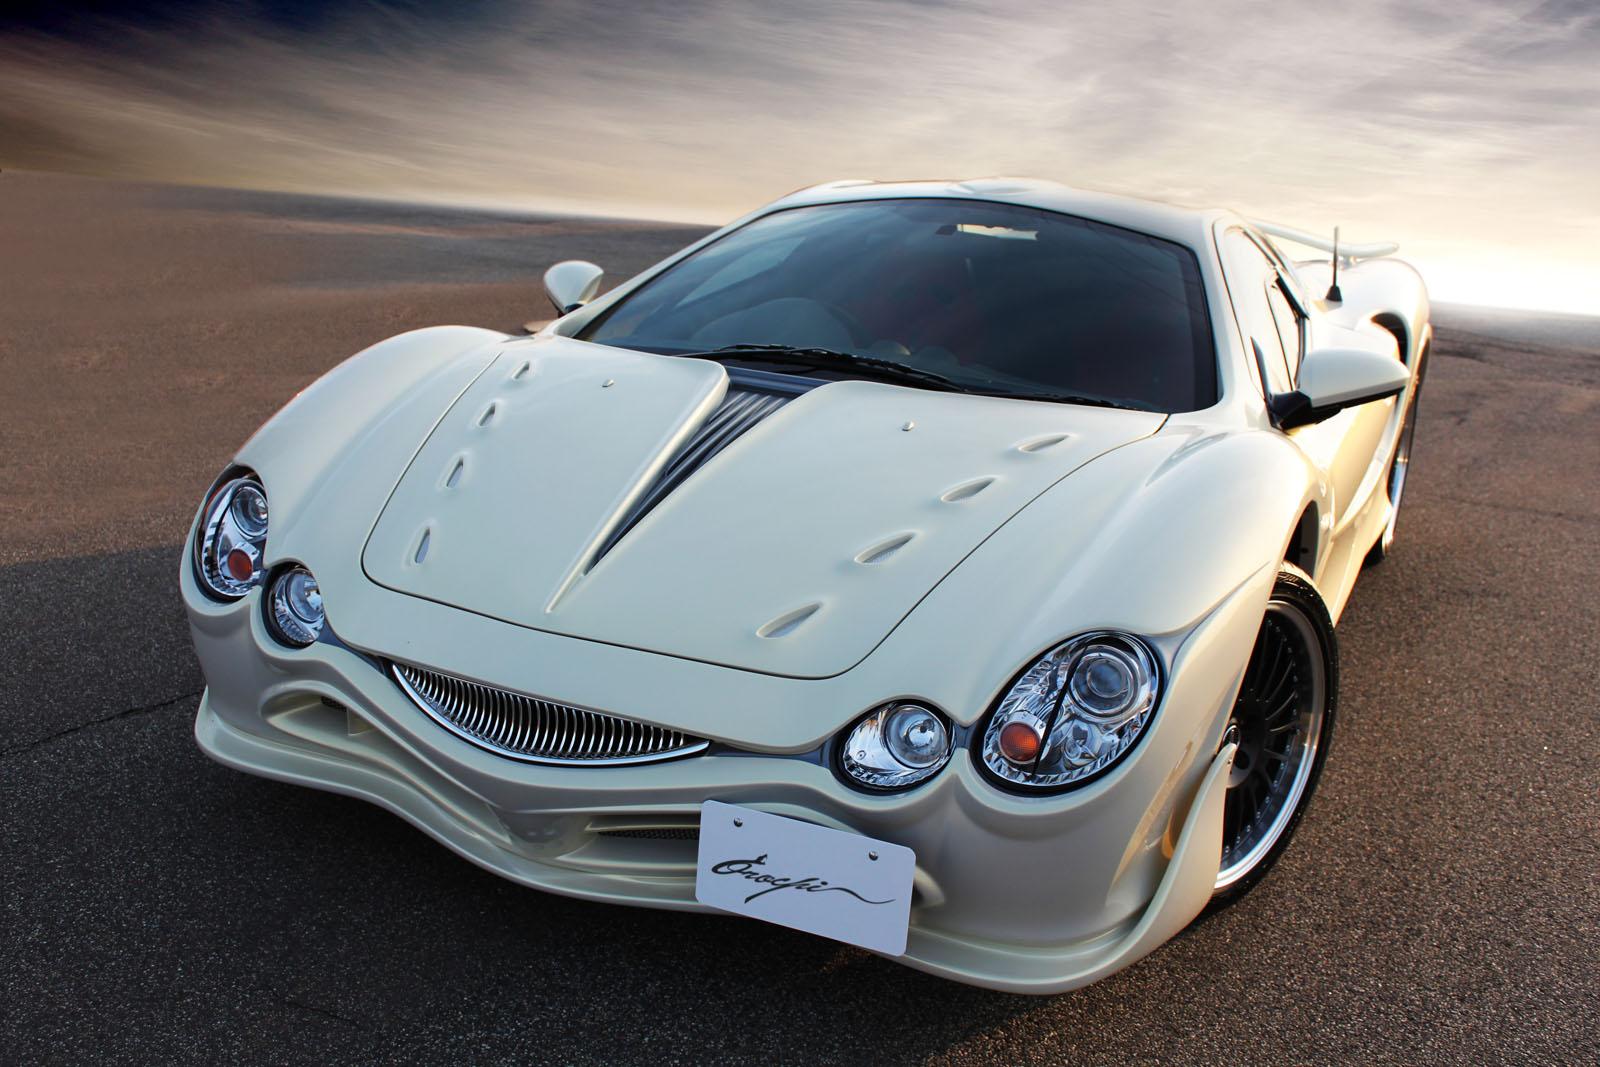 Mitsuoka Orochi Production Coming To An End